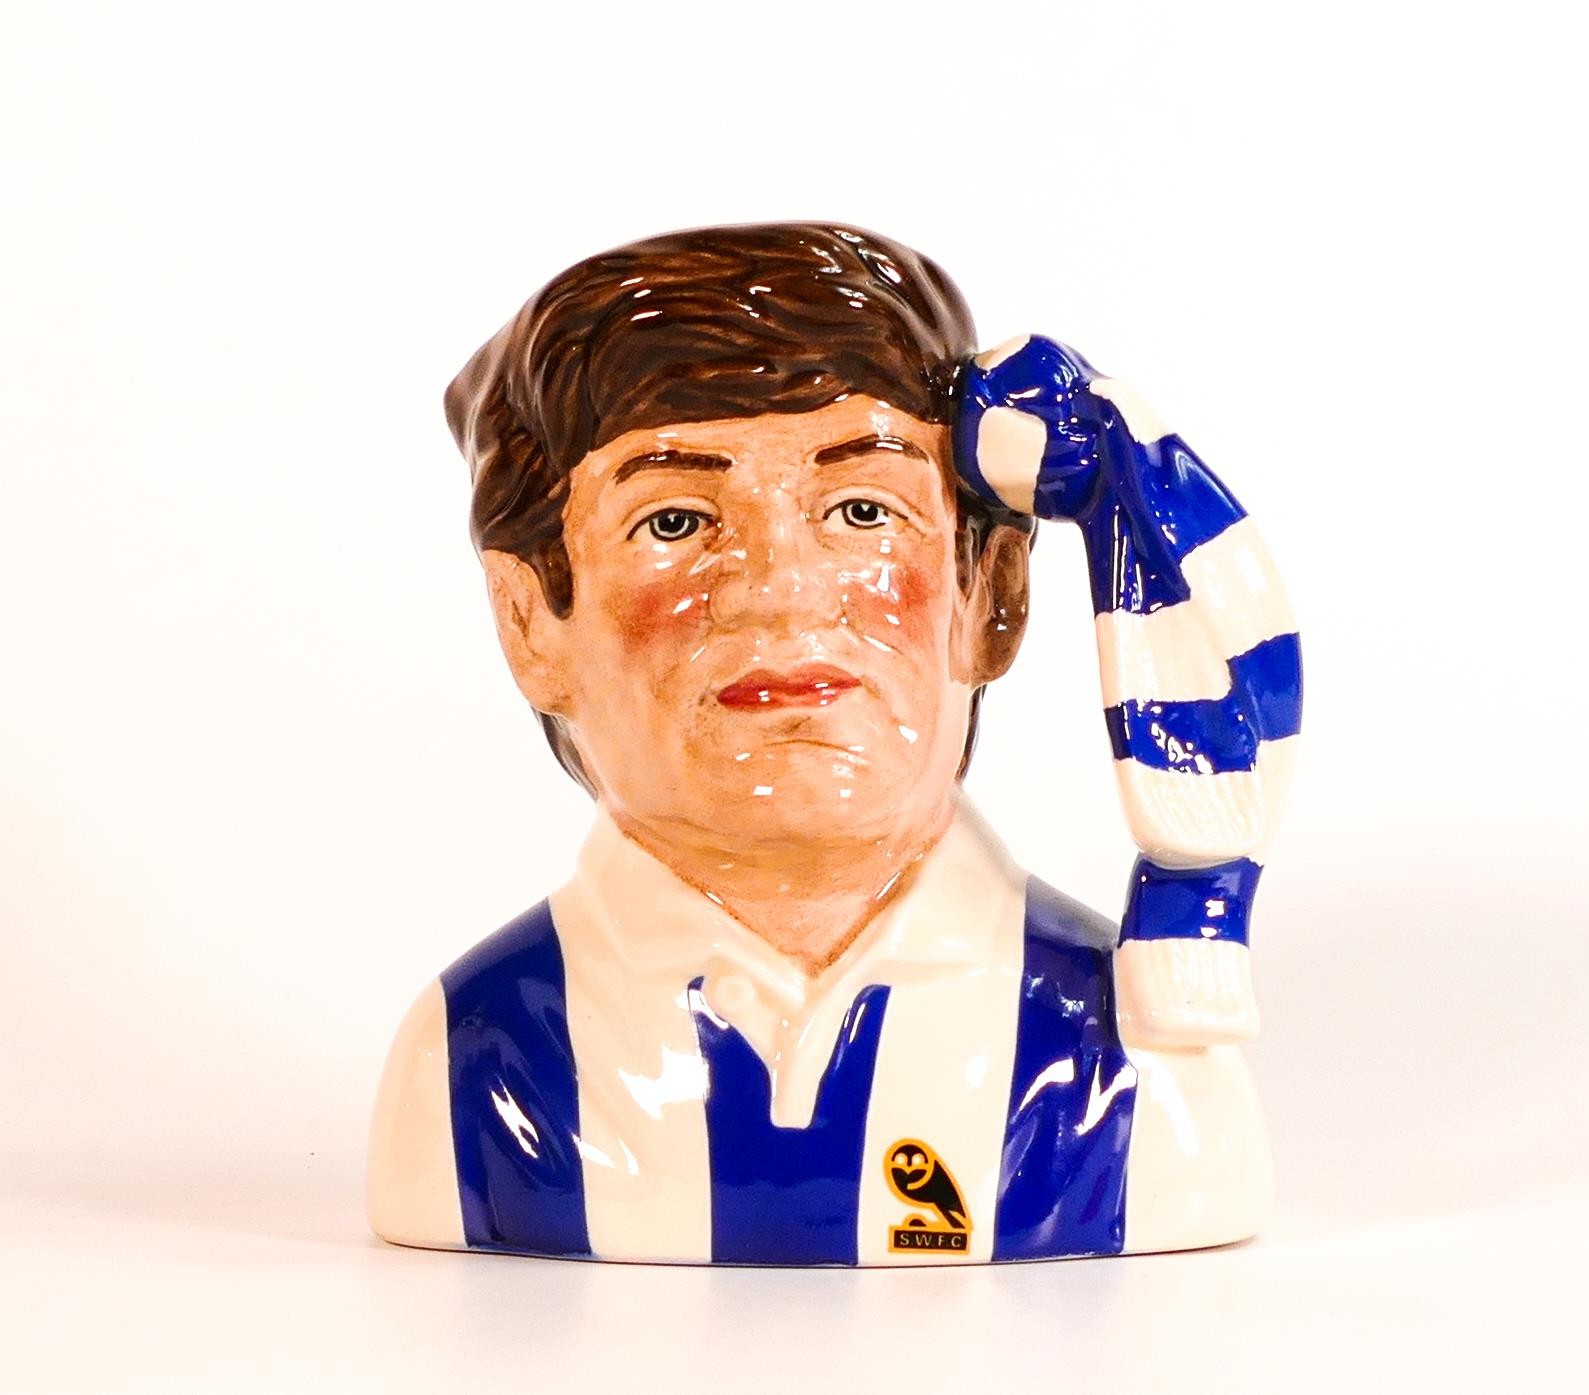 Royal Doulton intermediate character jug Sheffield Wednesday D6958 from the Football Supporters